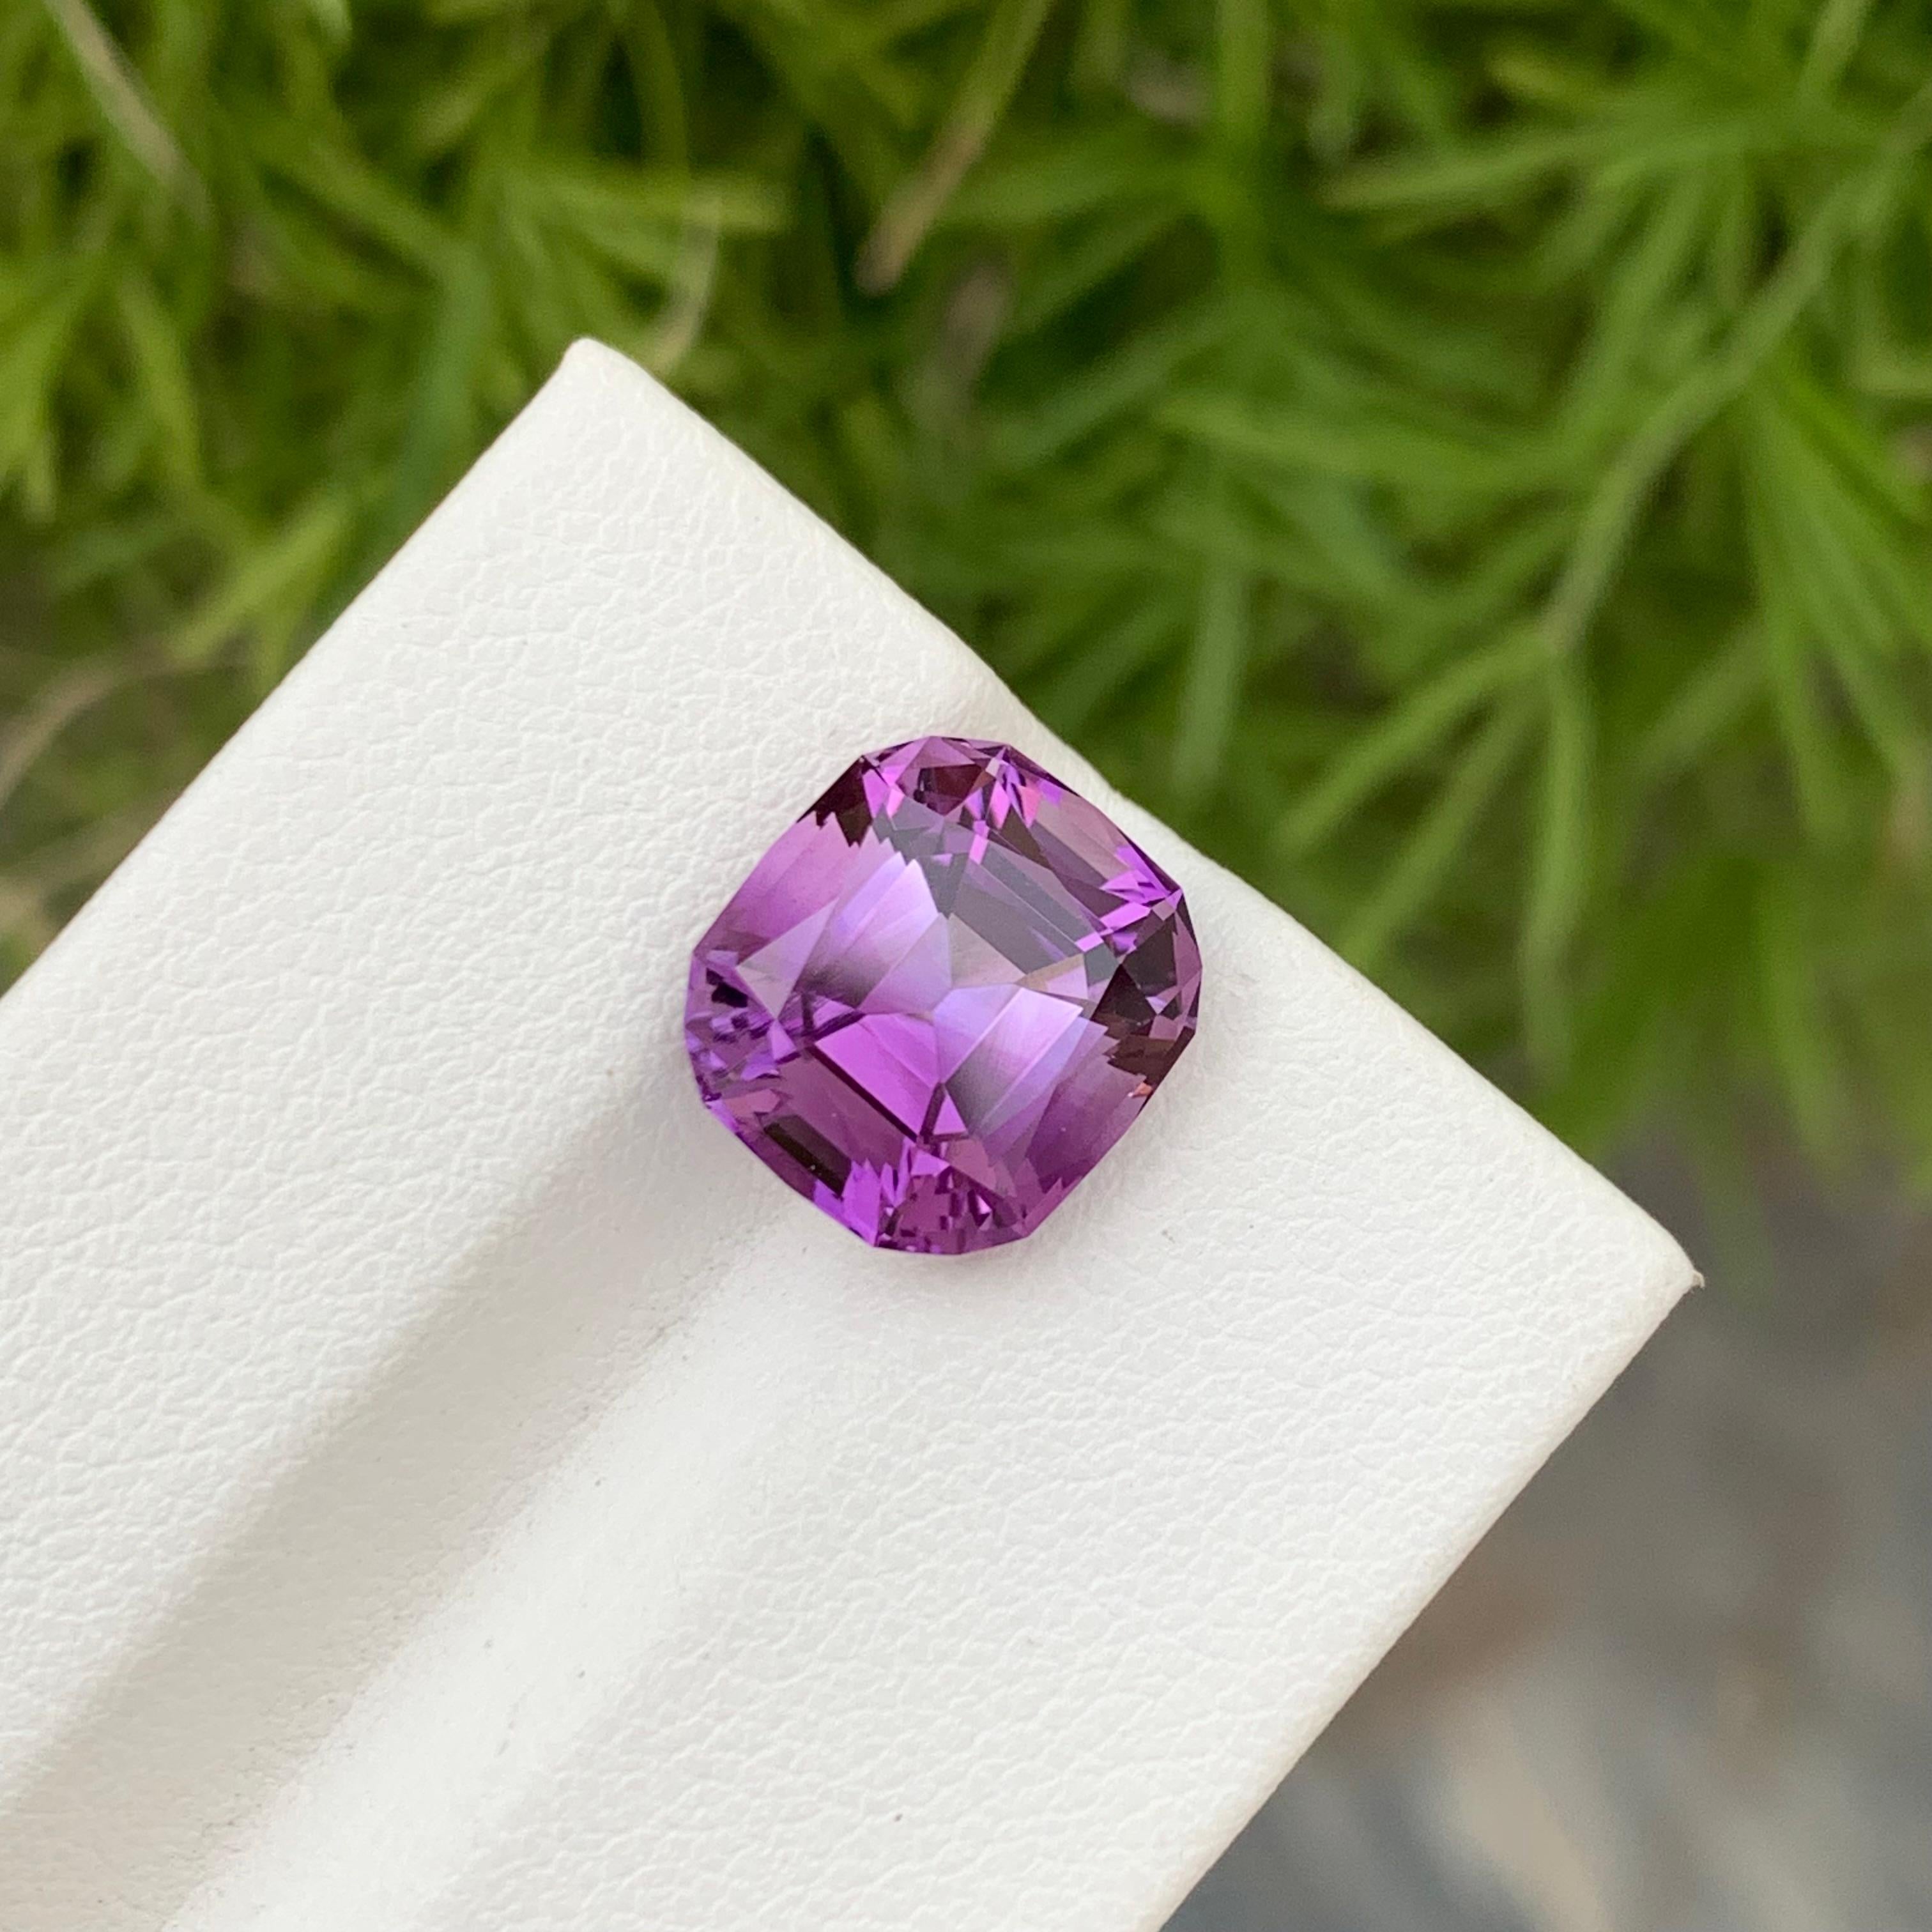 Glamorous 5.00 Carats Cushion Shape Loose Purple Amethyst Gem For Ring  For Sale 5